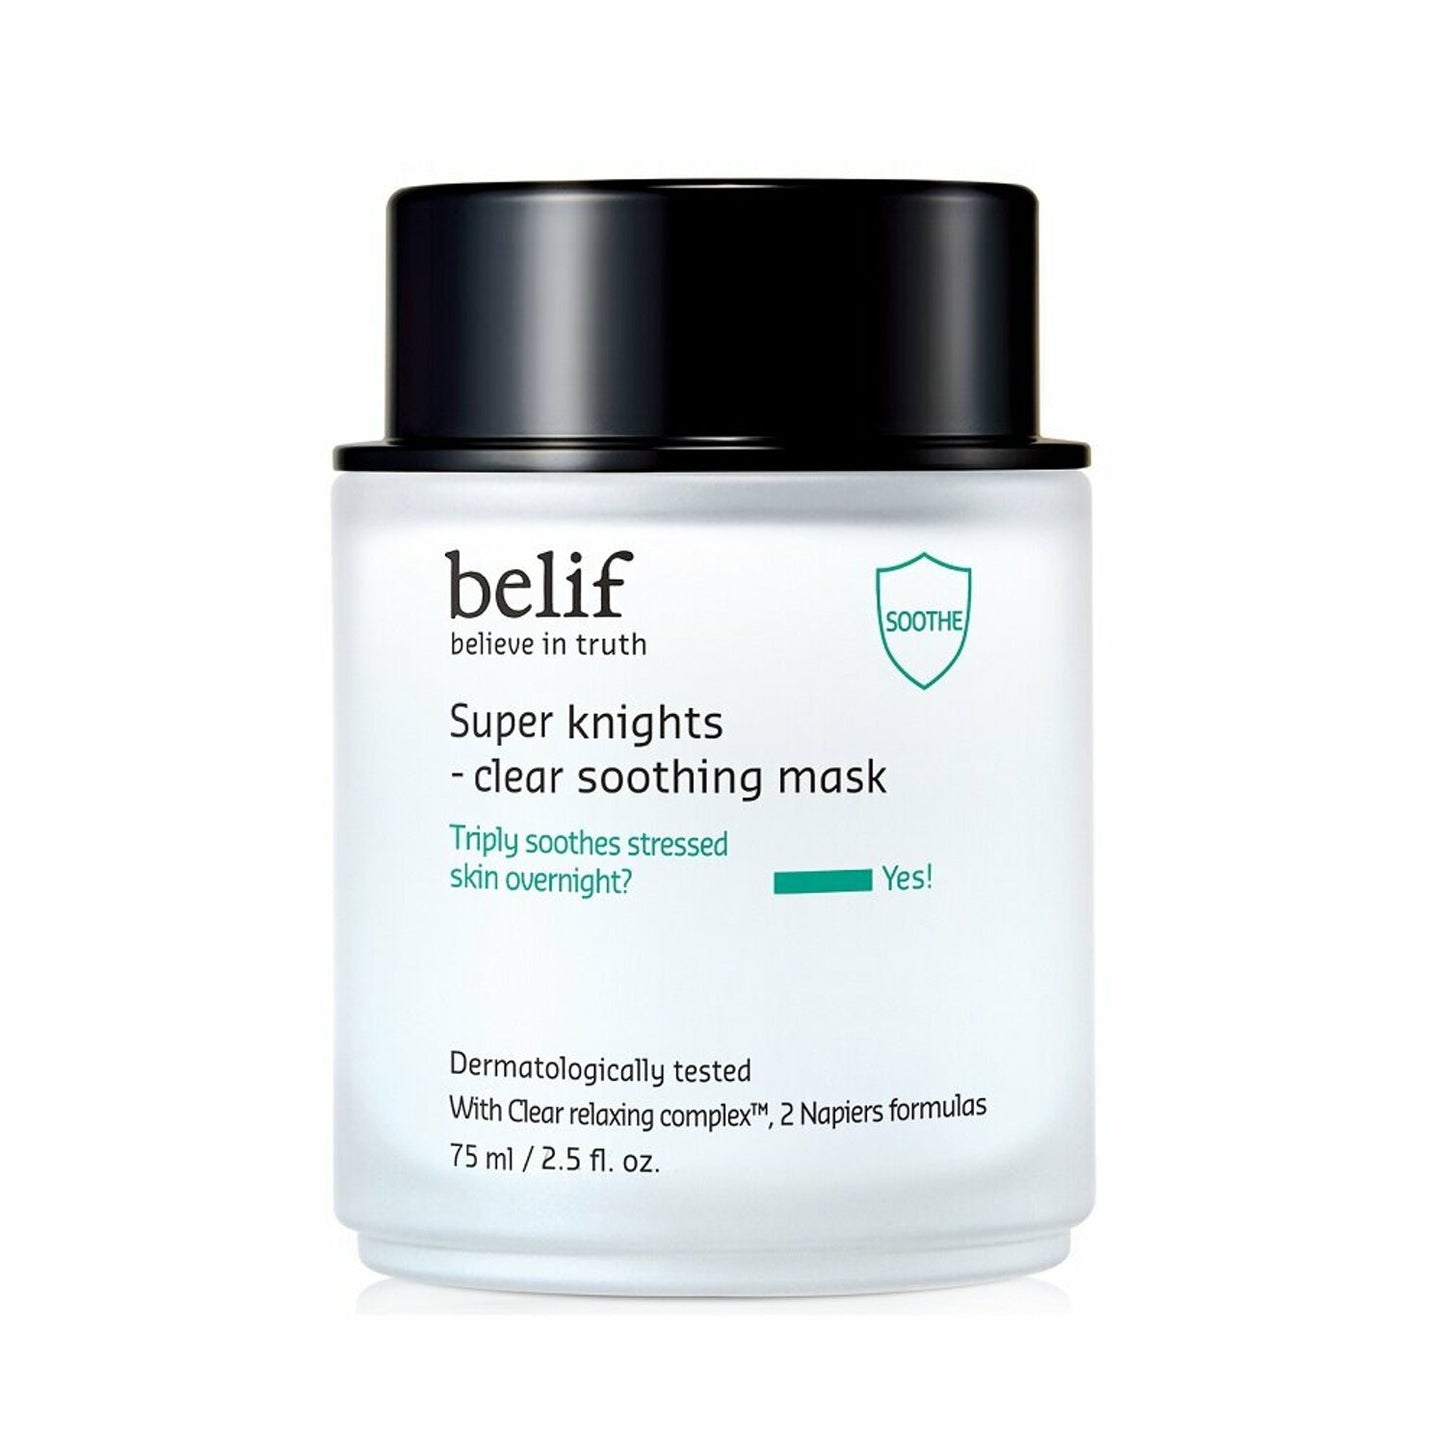 belif Super Knights Clear Soothing Mask 75mL / 2.5 fl.oz